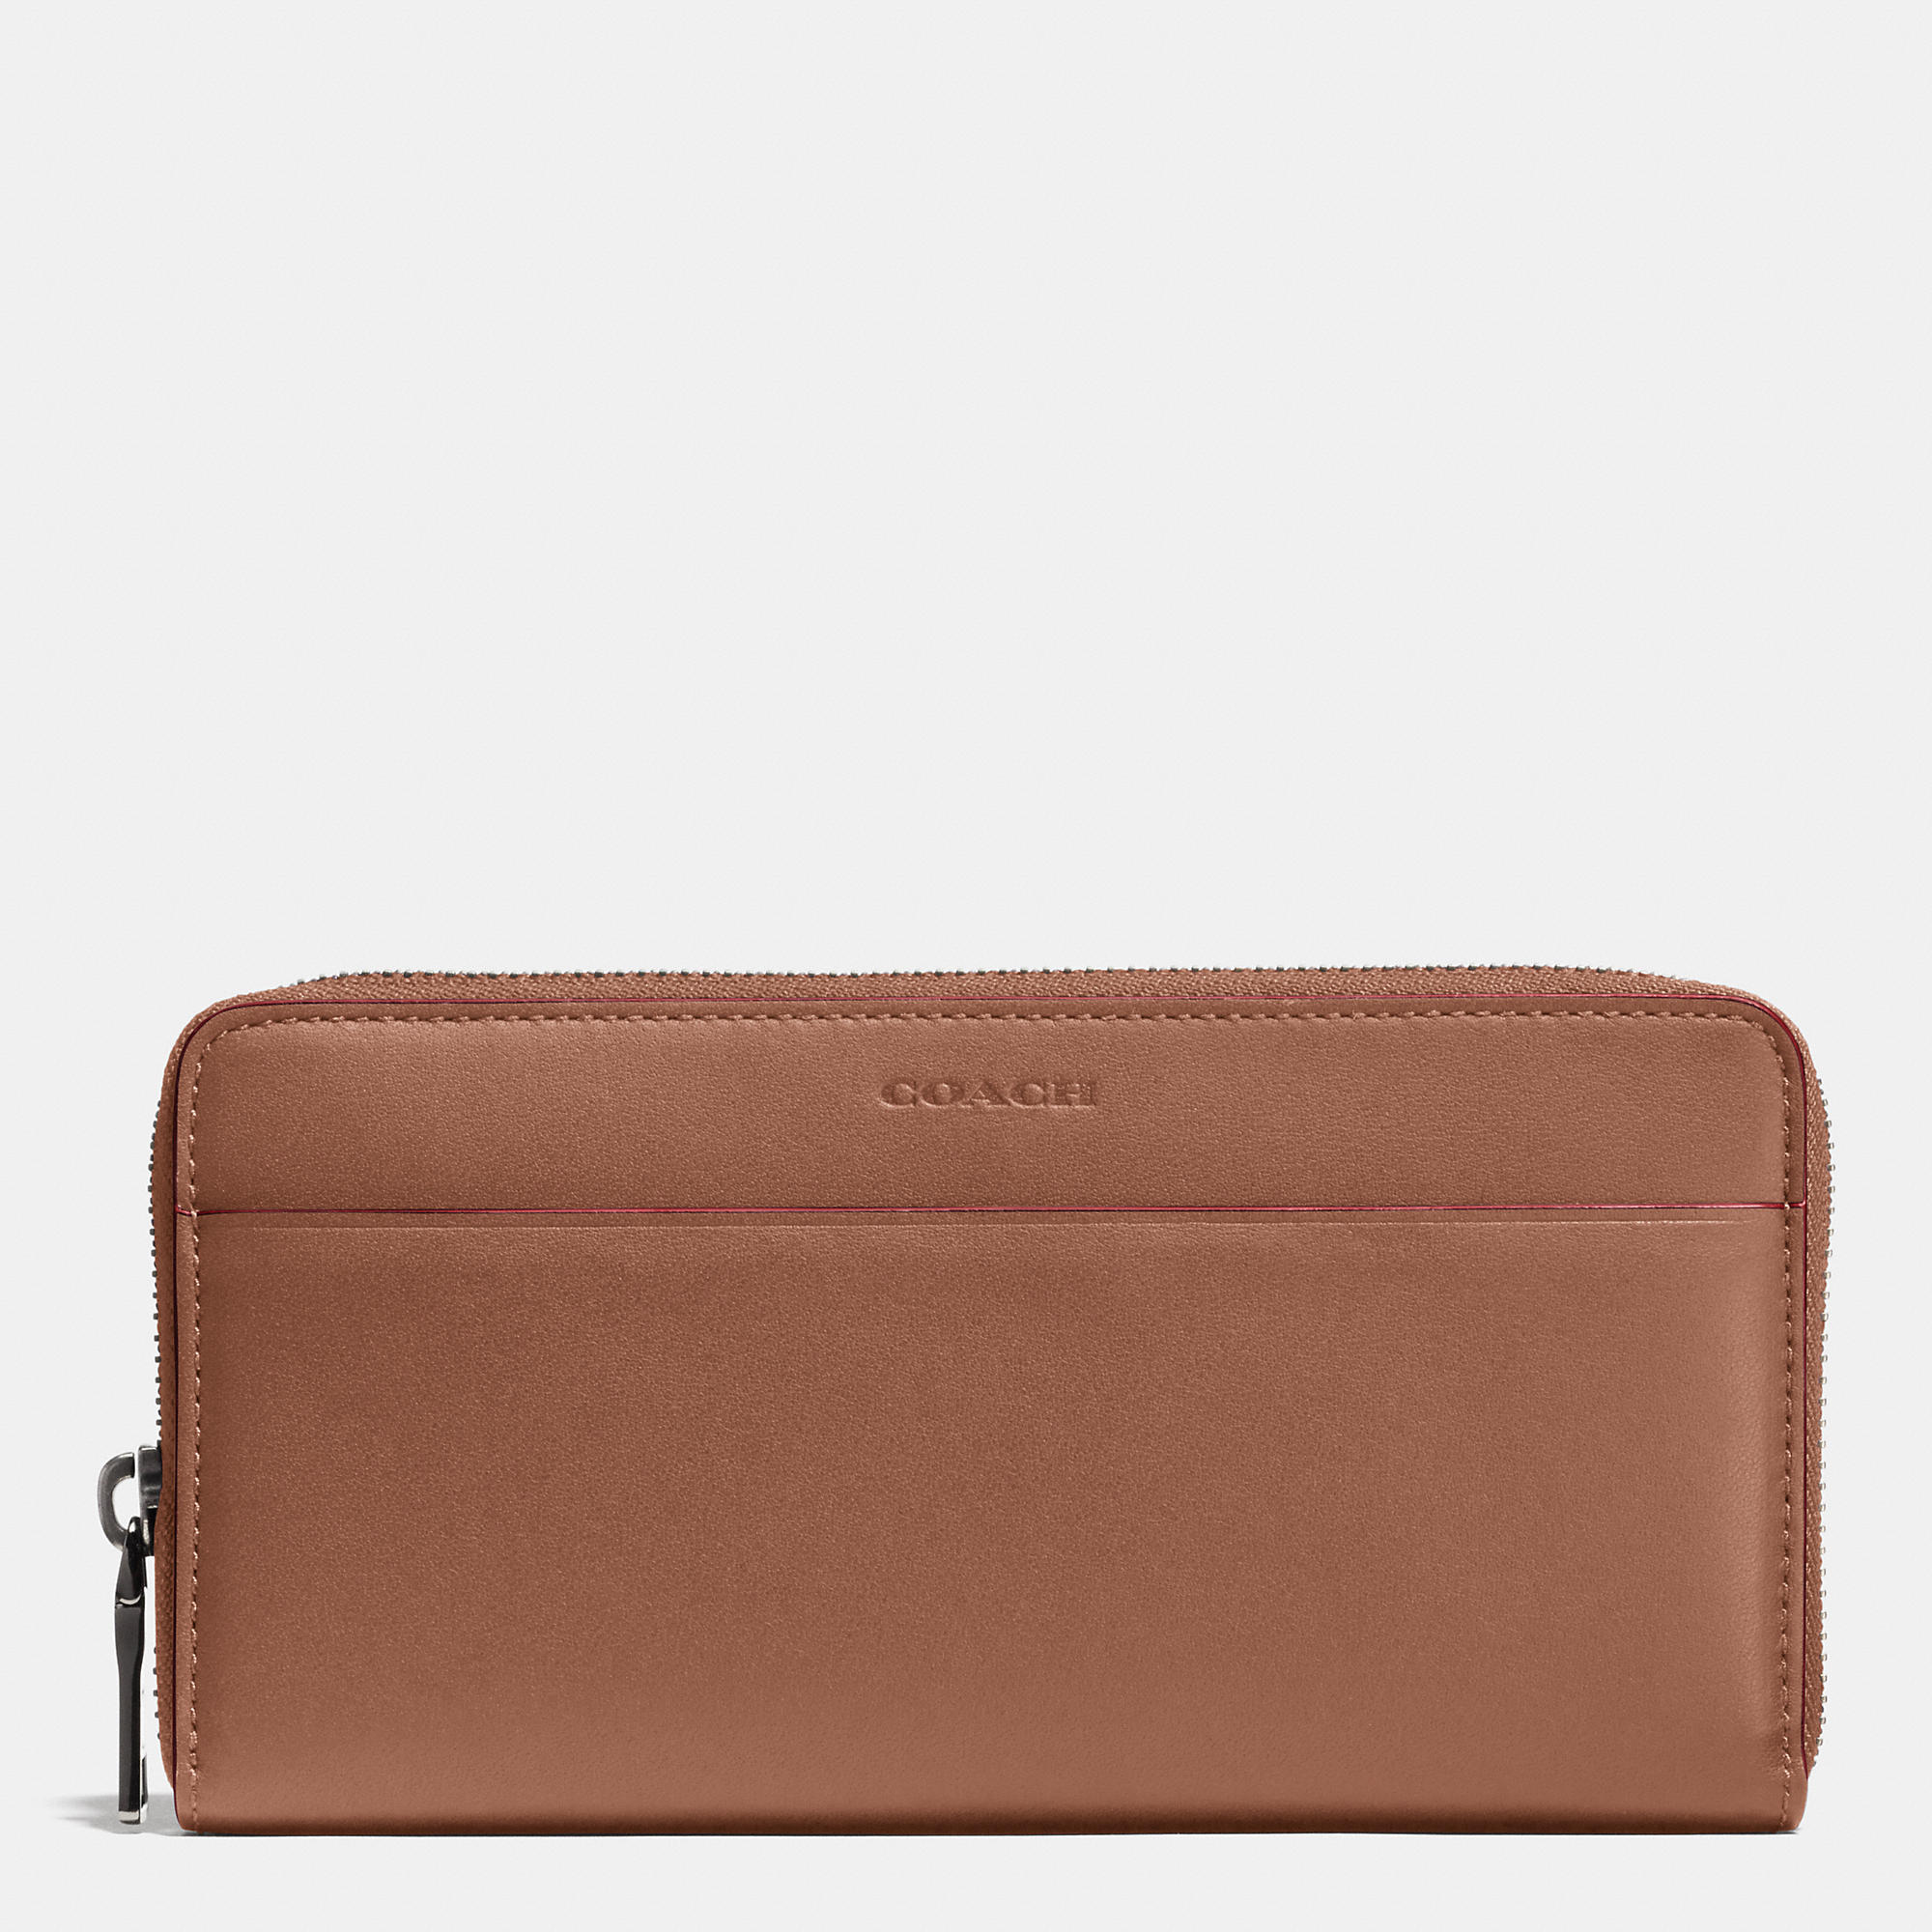 Causual Coach Accordion Zip Wallet In Glovetanned Leather | Women